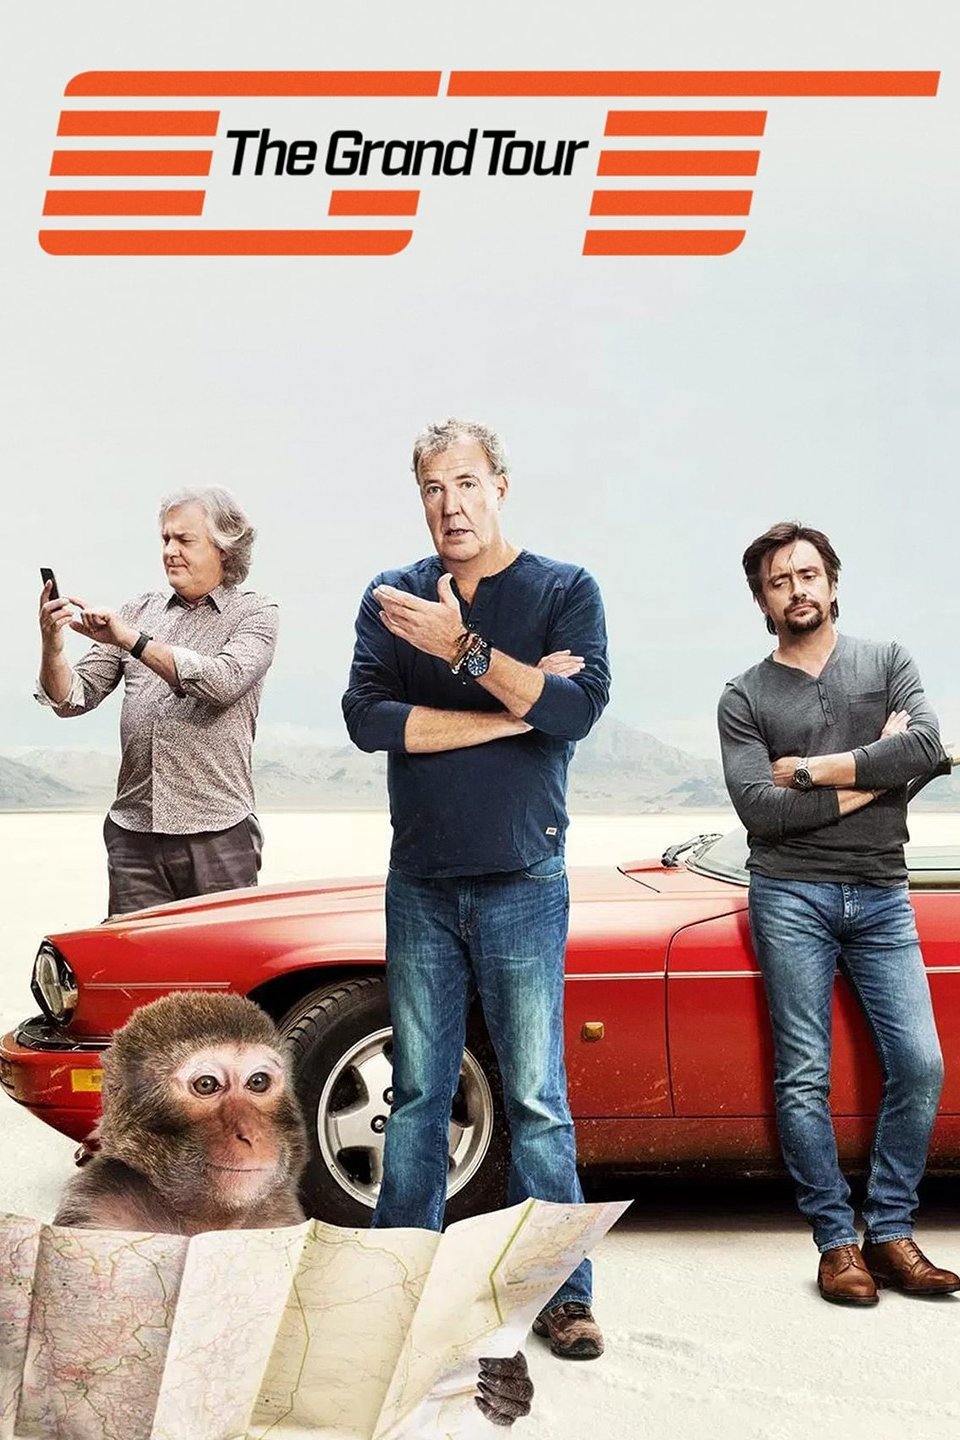 when is the grand tour season 2 coming out